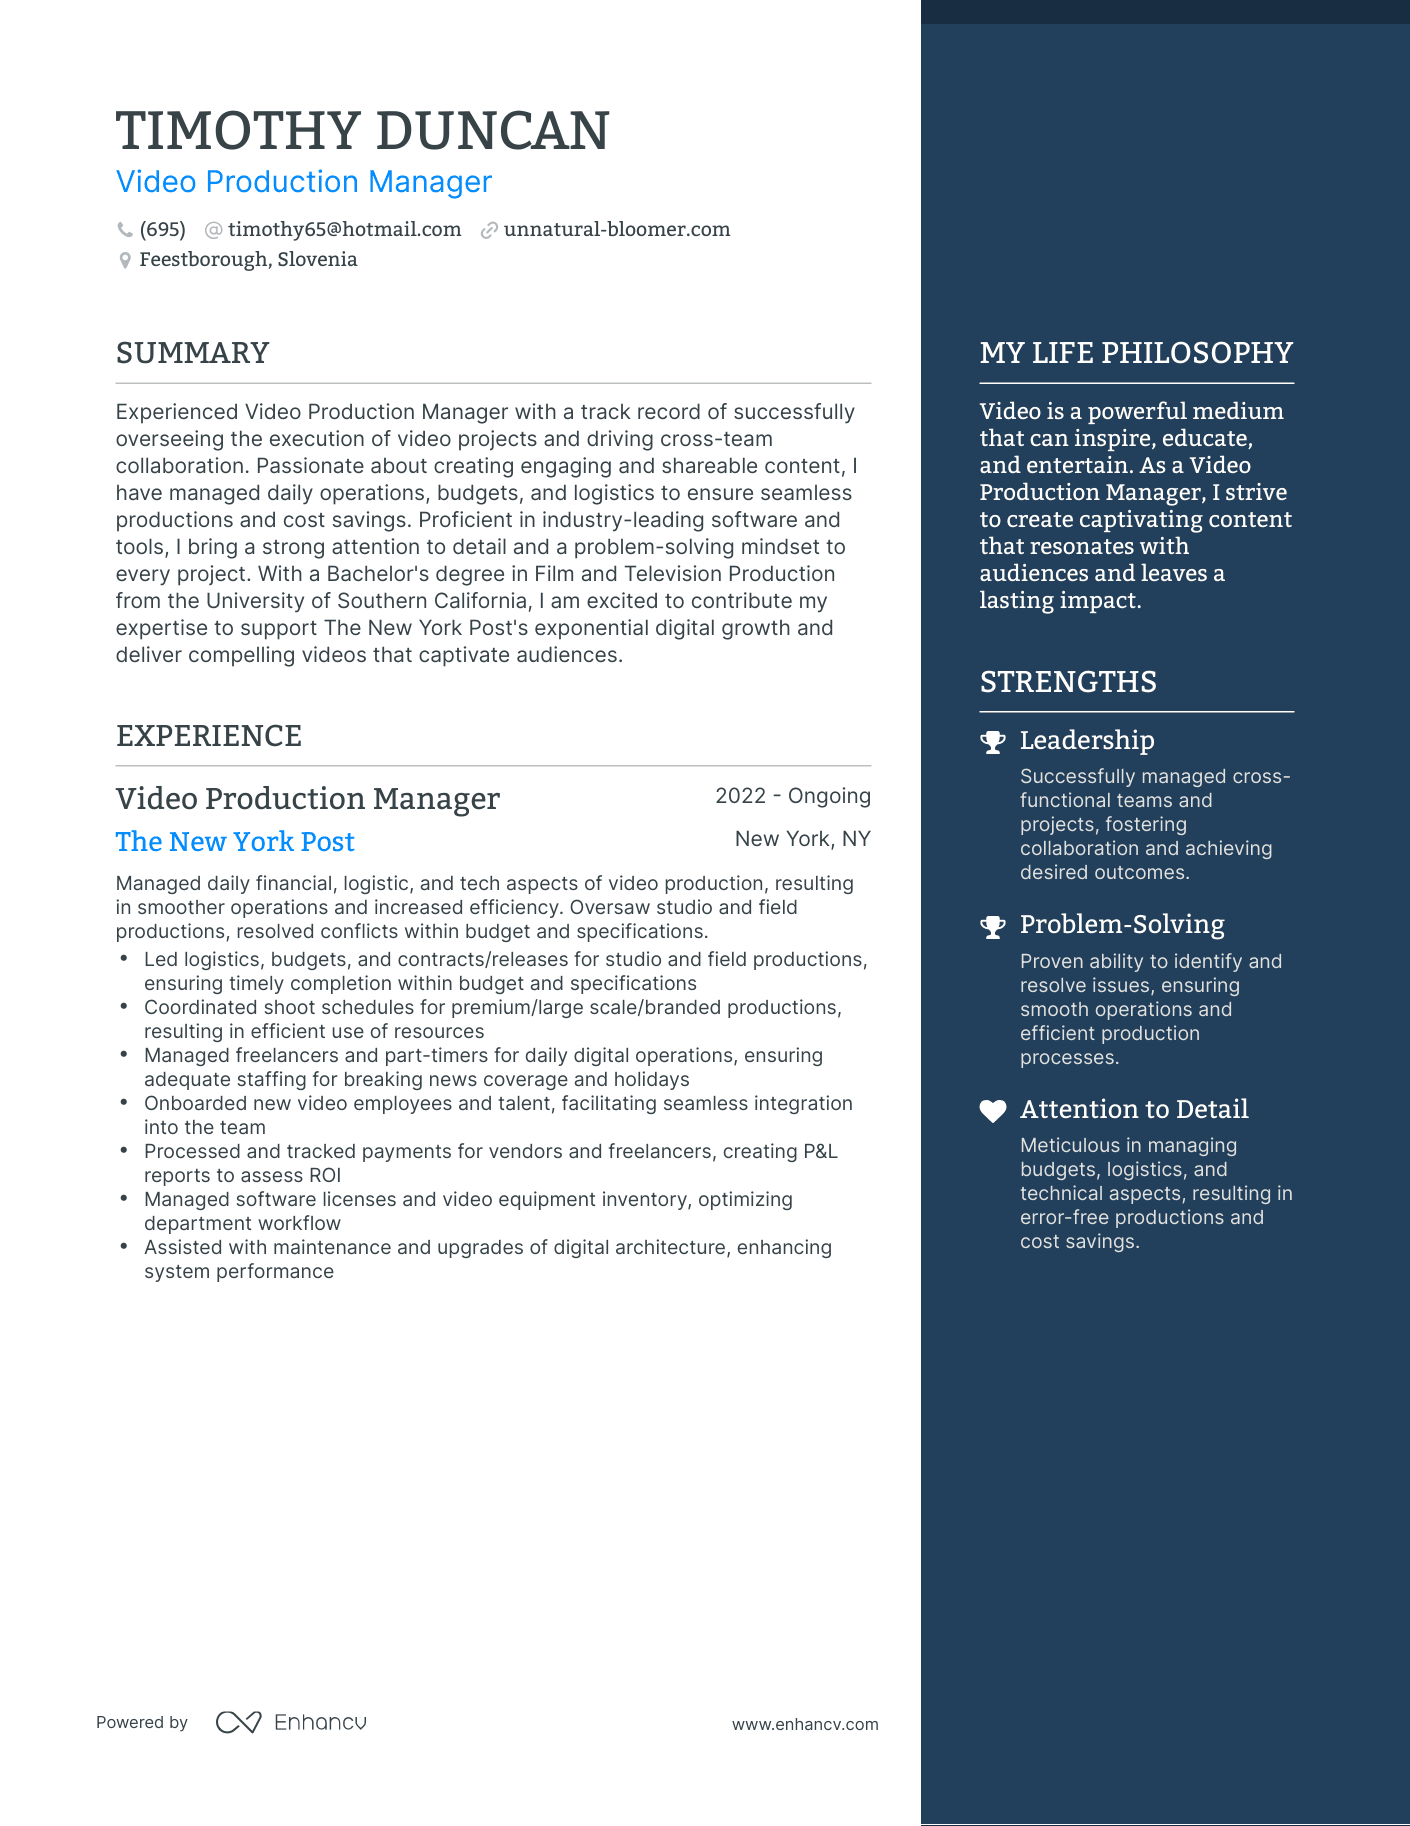 Video Production Manager resume example